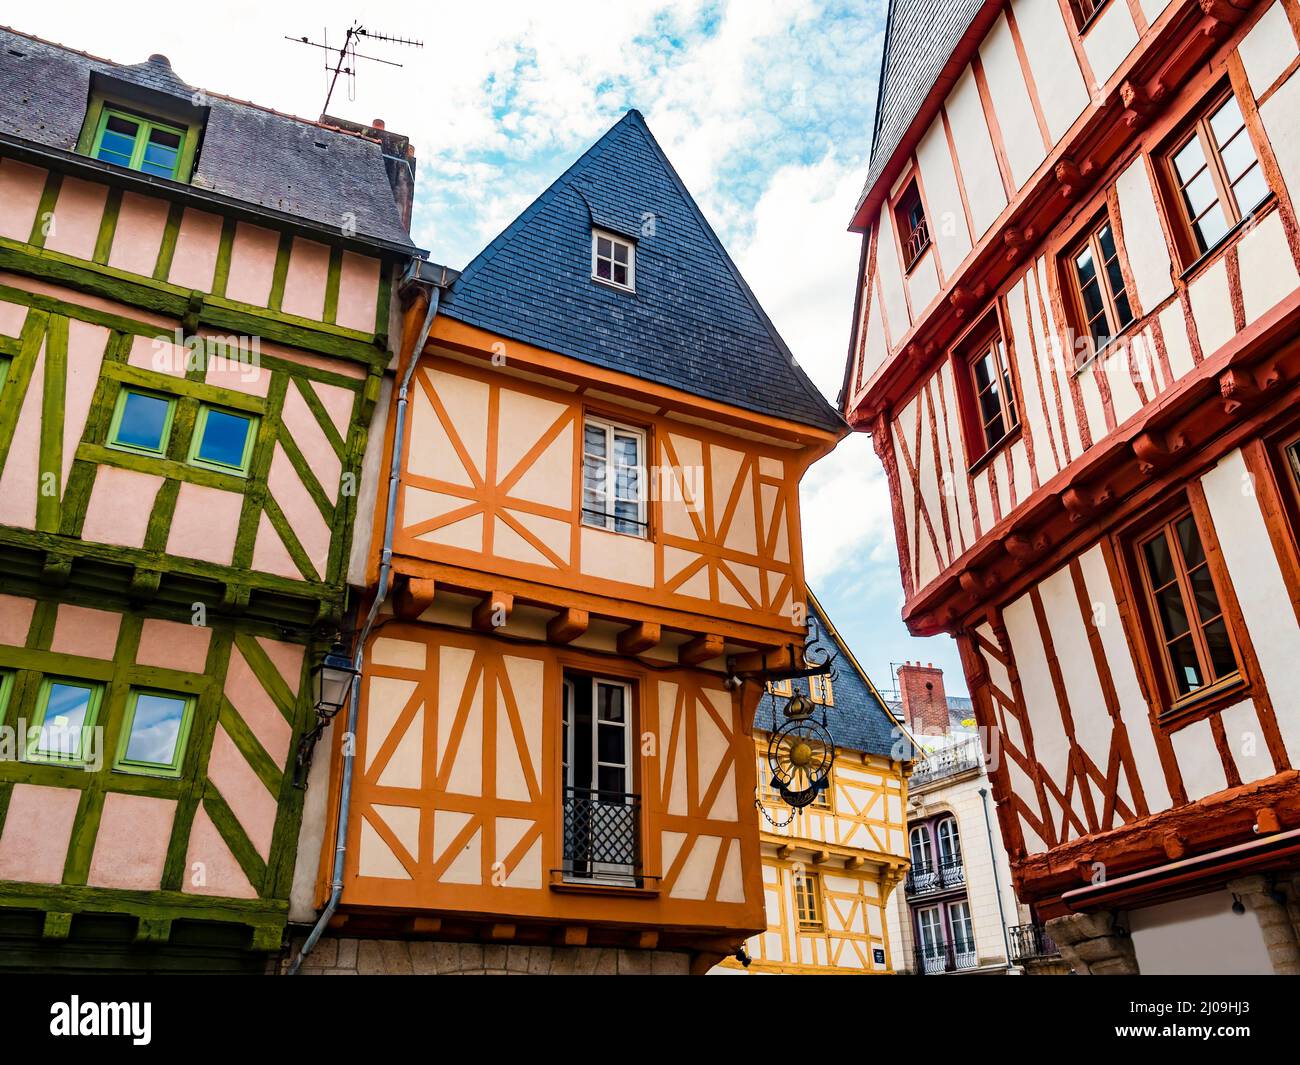 Colorful houses in the historical center of Vannes, coastal medieveal town in Morbihan departement, Brittany, France Stock Photo